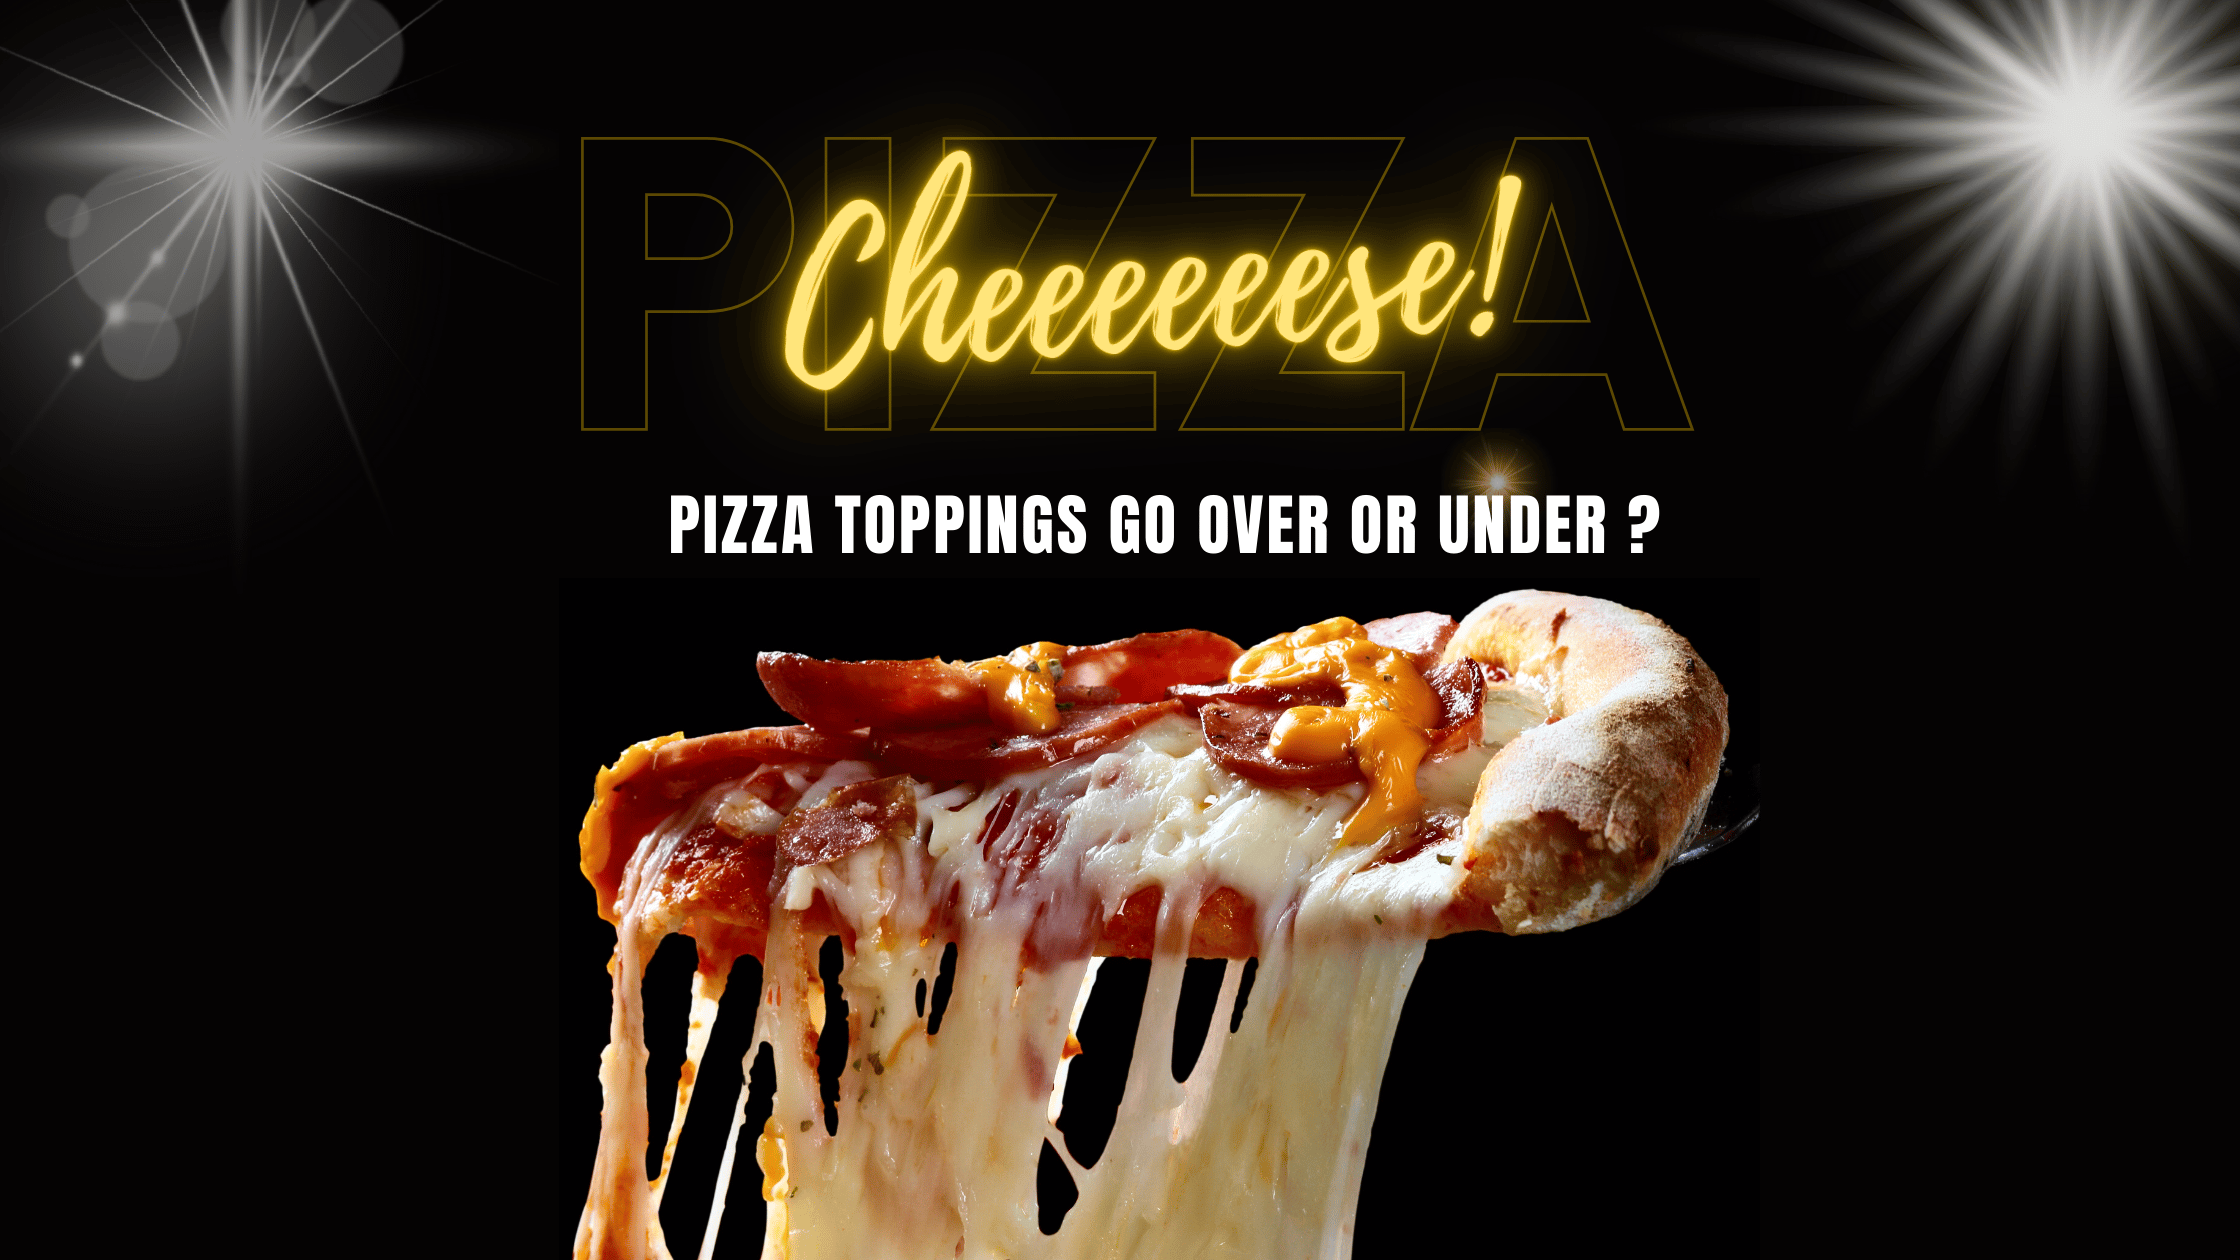 Pizza toppings under cheese or over